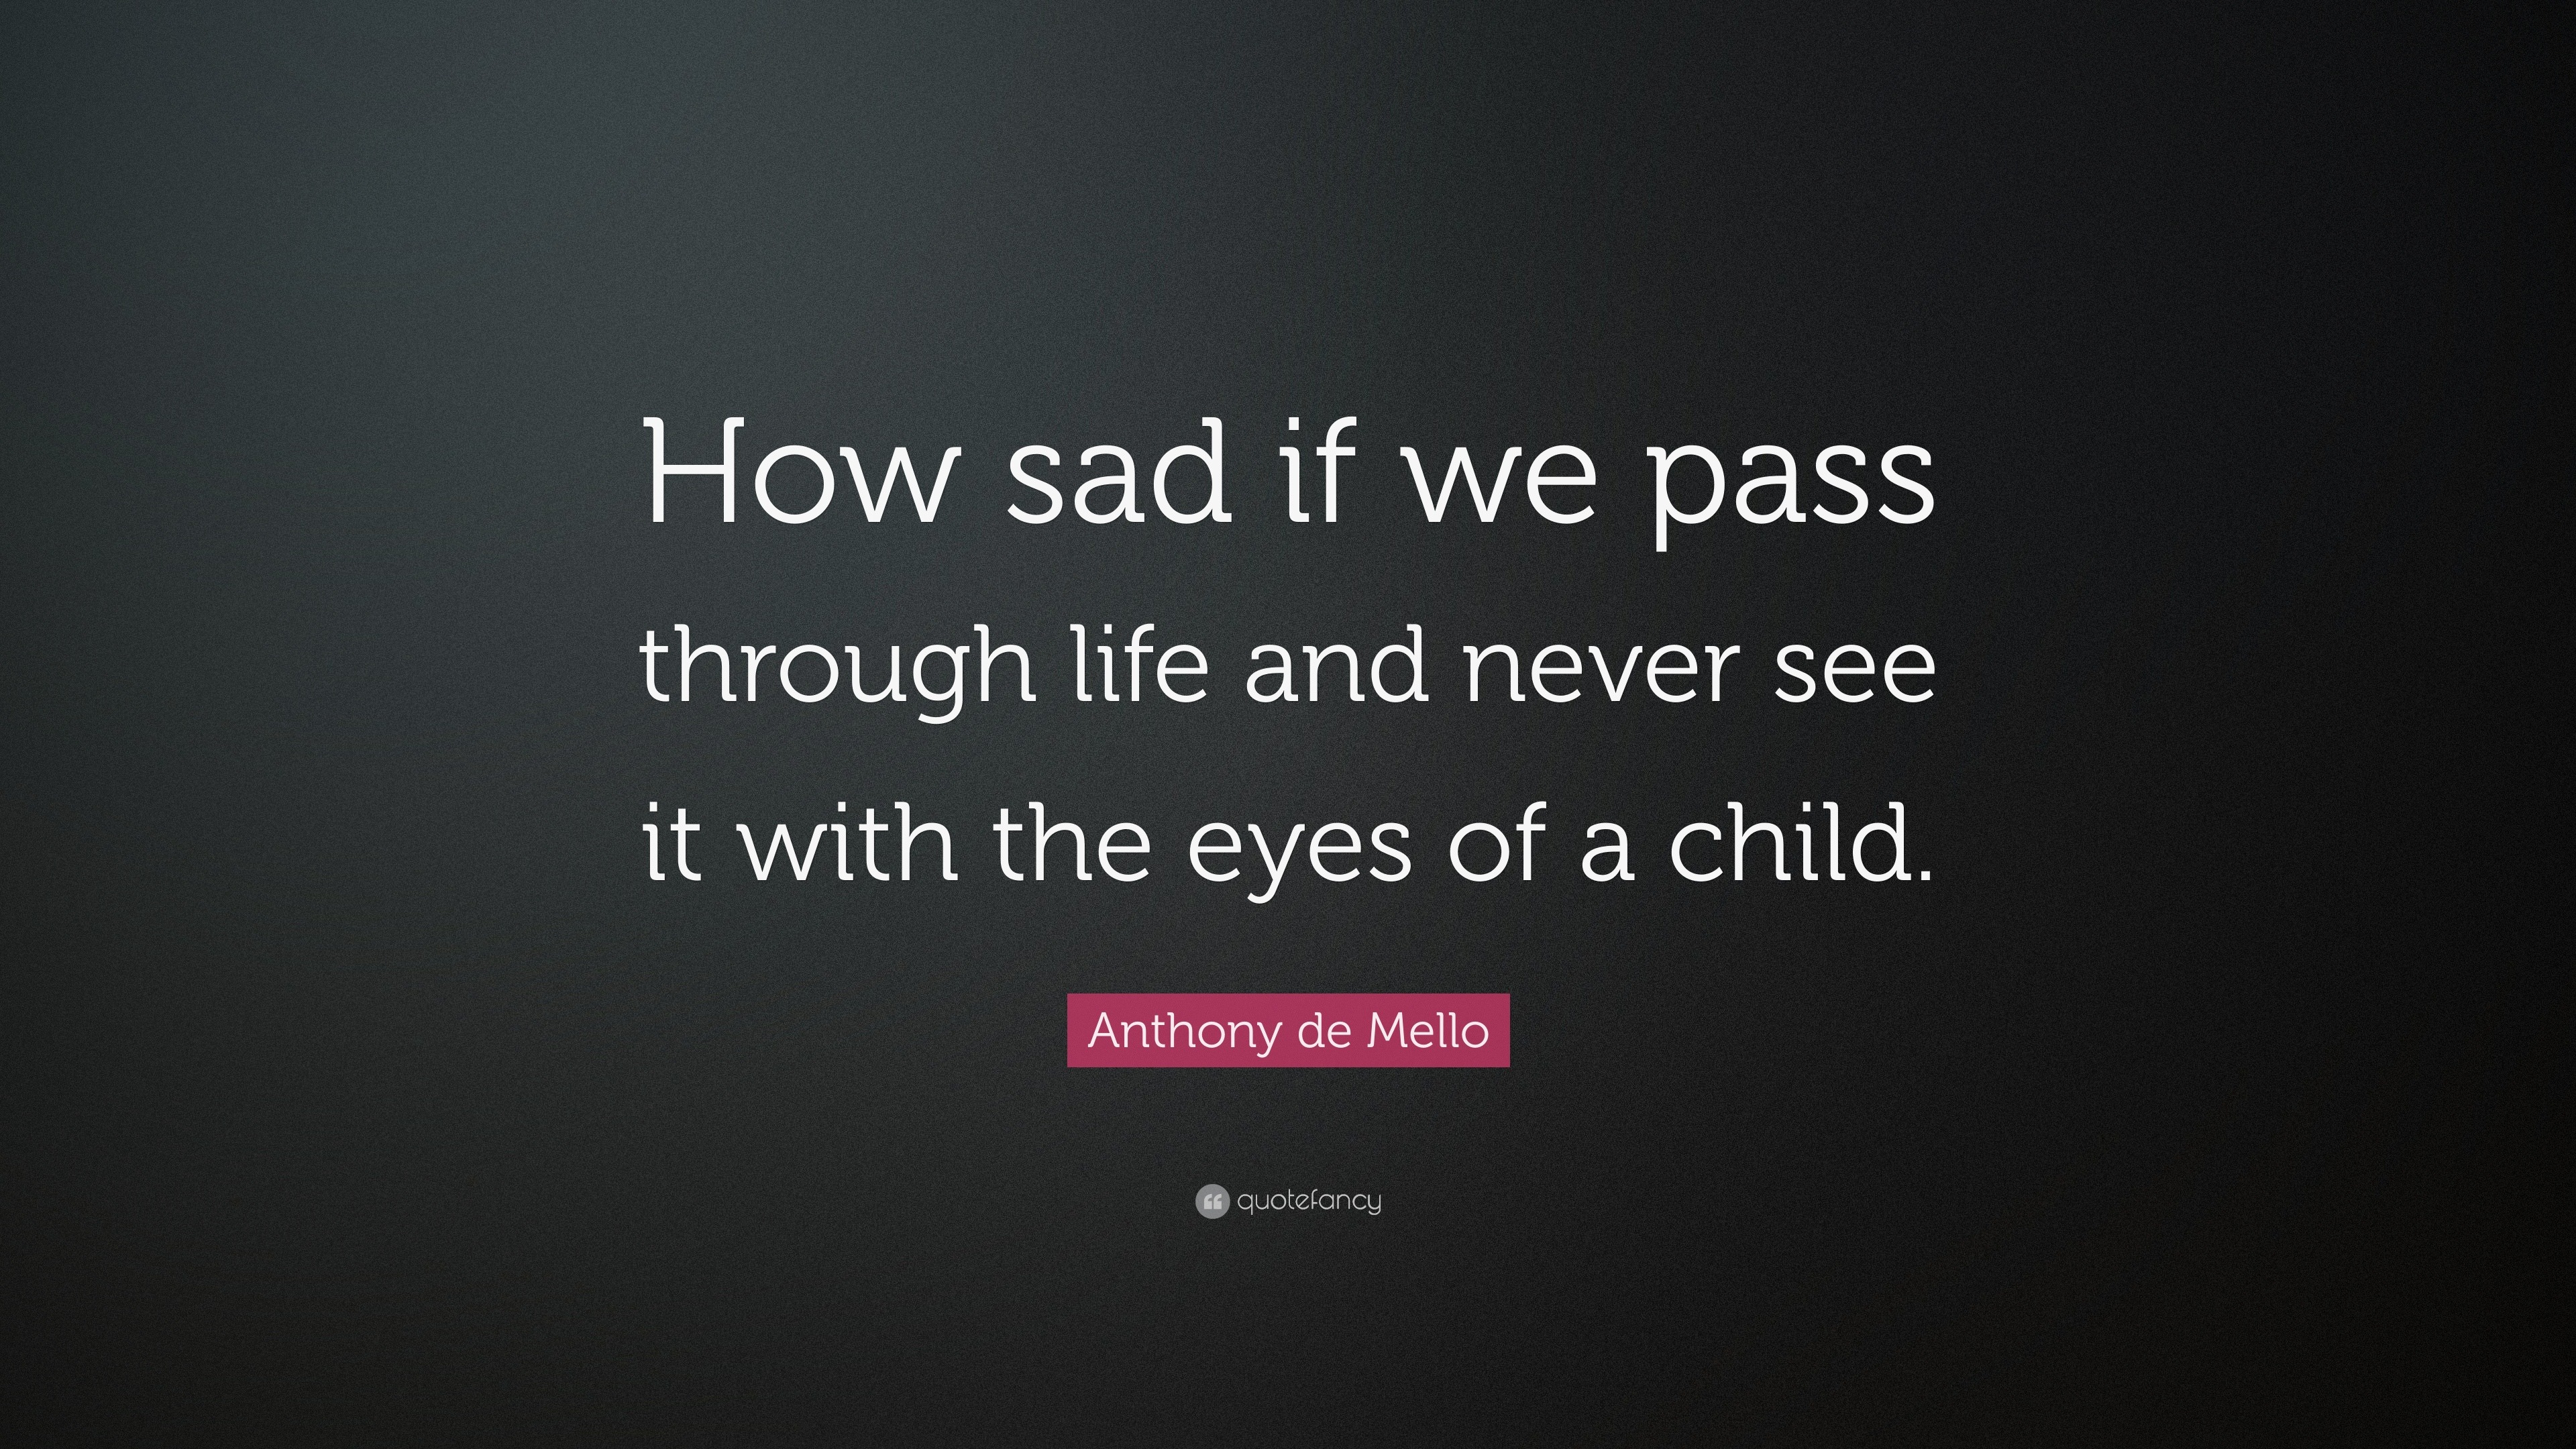 Anthony de Mello Quote: "How sad if we pass through life and never see it with the eyes of a ...